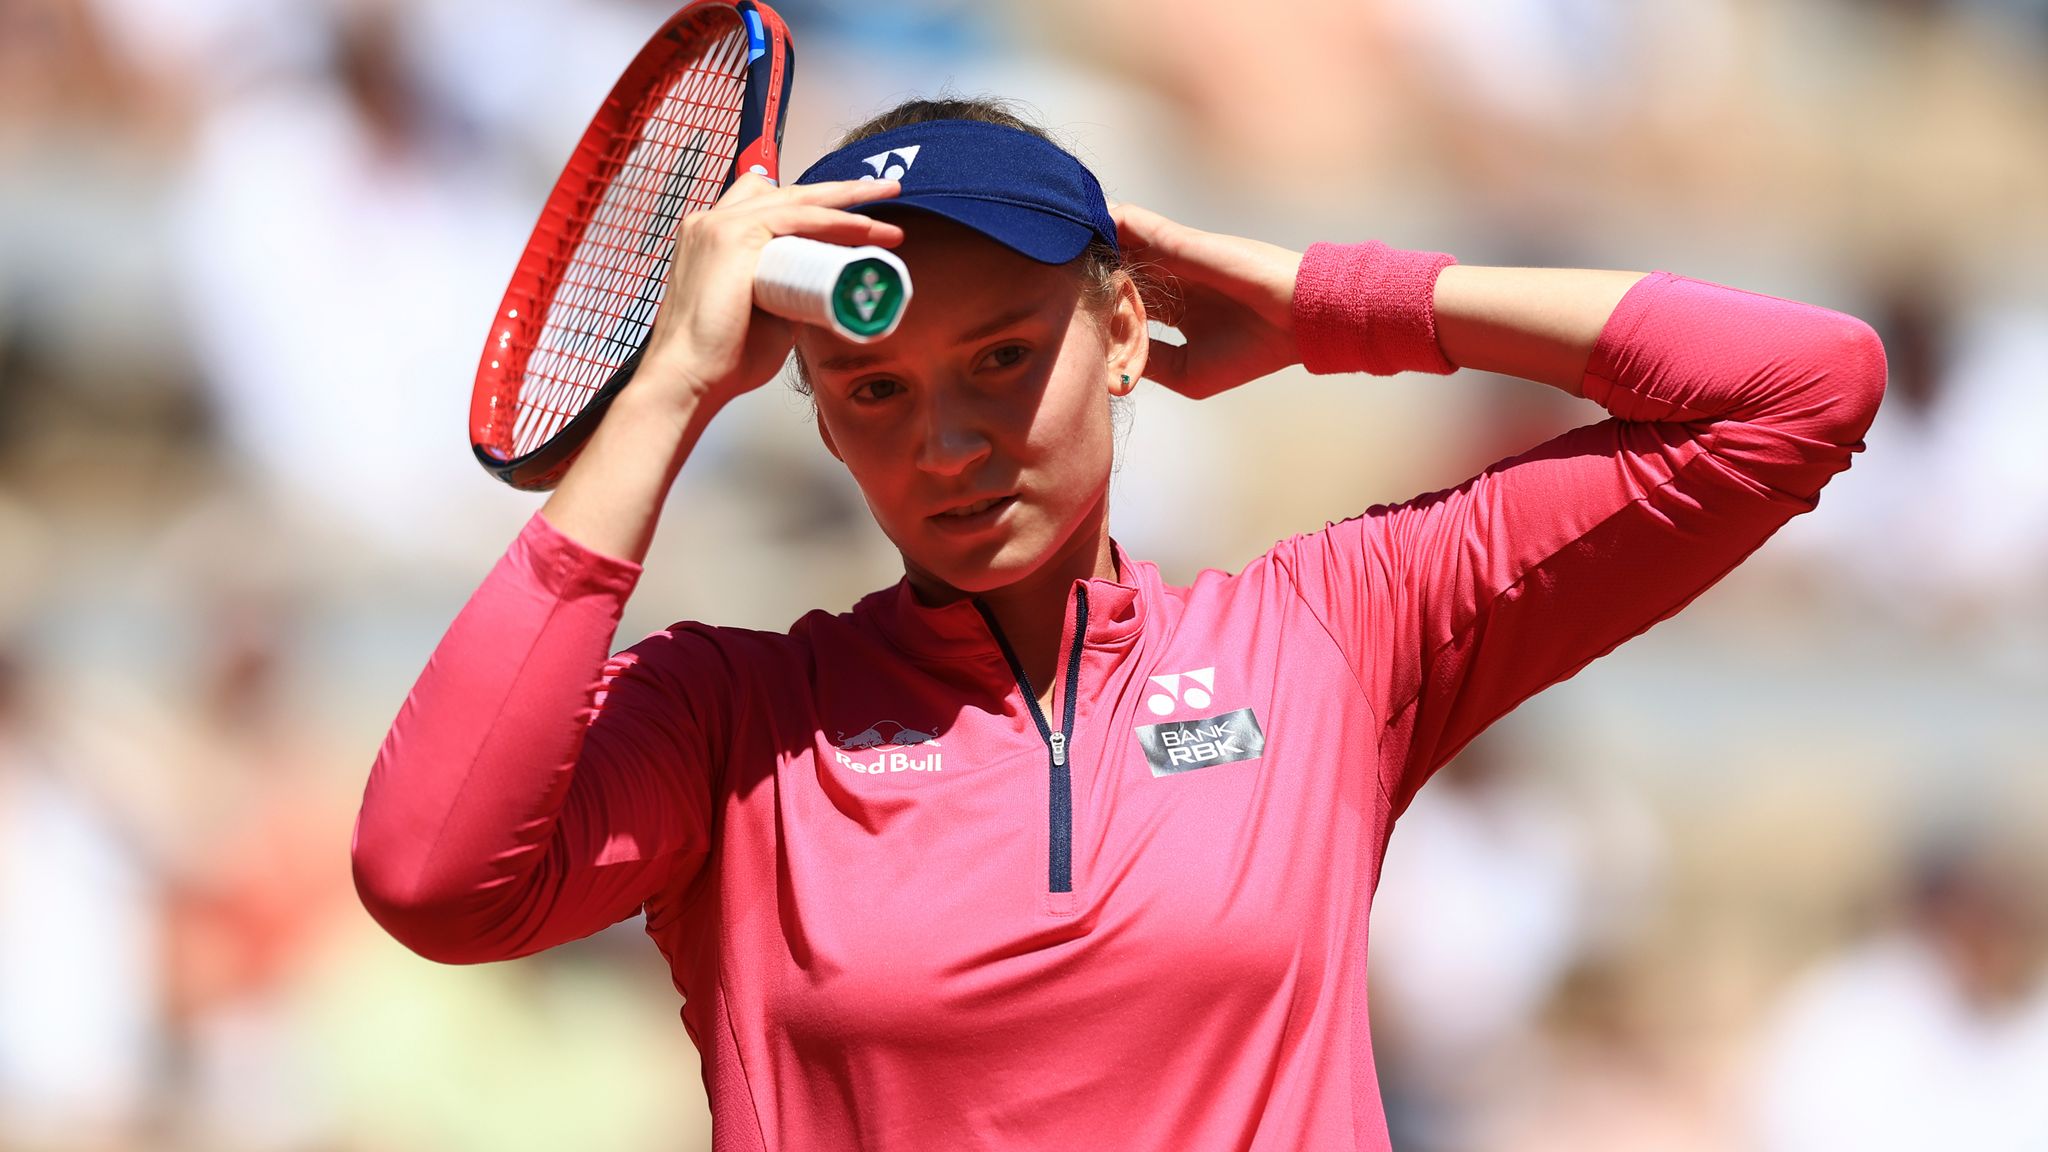 French Open Wimbledon champion Elena Rybakina pulls out of Grand Slam after struggling to breathe Tennis News Sky Sports